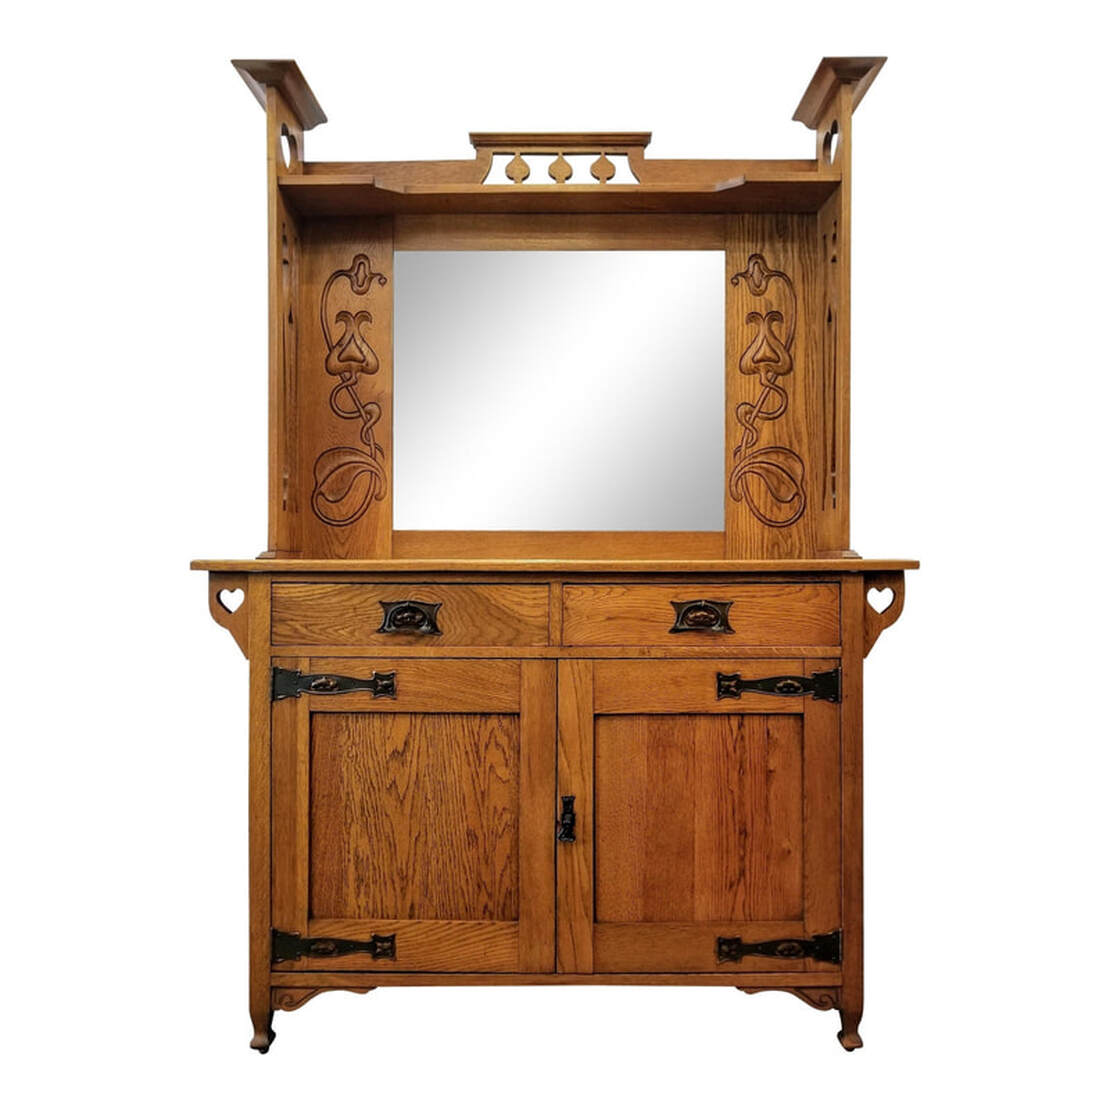 Antique main sideboard built with burl figured plain oak.  The top is decorated with peacock tail fret rails above a shaped shelf.  The side supports have William Cowie style heart cutouts at the top and Sheraton style urn fretwork throughout the rest of the supports.  The central beveled mirror is framed on either side with oak panels into which are relief- carved Art Nouveau style bursting seed pods and flowers.  The sideboard surface is above two frieze drawers fronted with single Art Nouveau / Arts & Crafts style copper bail pulls and back plates.  To each side of the frieze are supports featuring the William Cowie syle cut-out hearts.  Below the drawers are two cabinet doors with Arts & Crafts copper strap hinges and a single drop pull. The doors open to reveal a storage cabinet with a single shelf.  The sideboard stands upon four spade feet.  There are two curved apron brackets on the front.